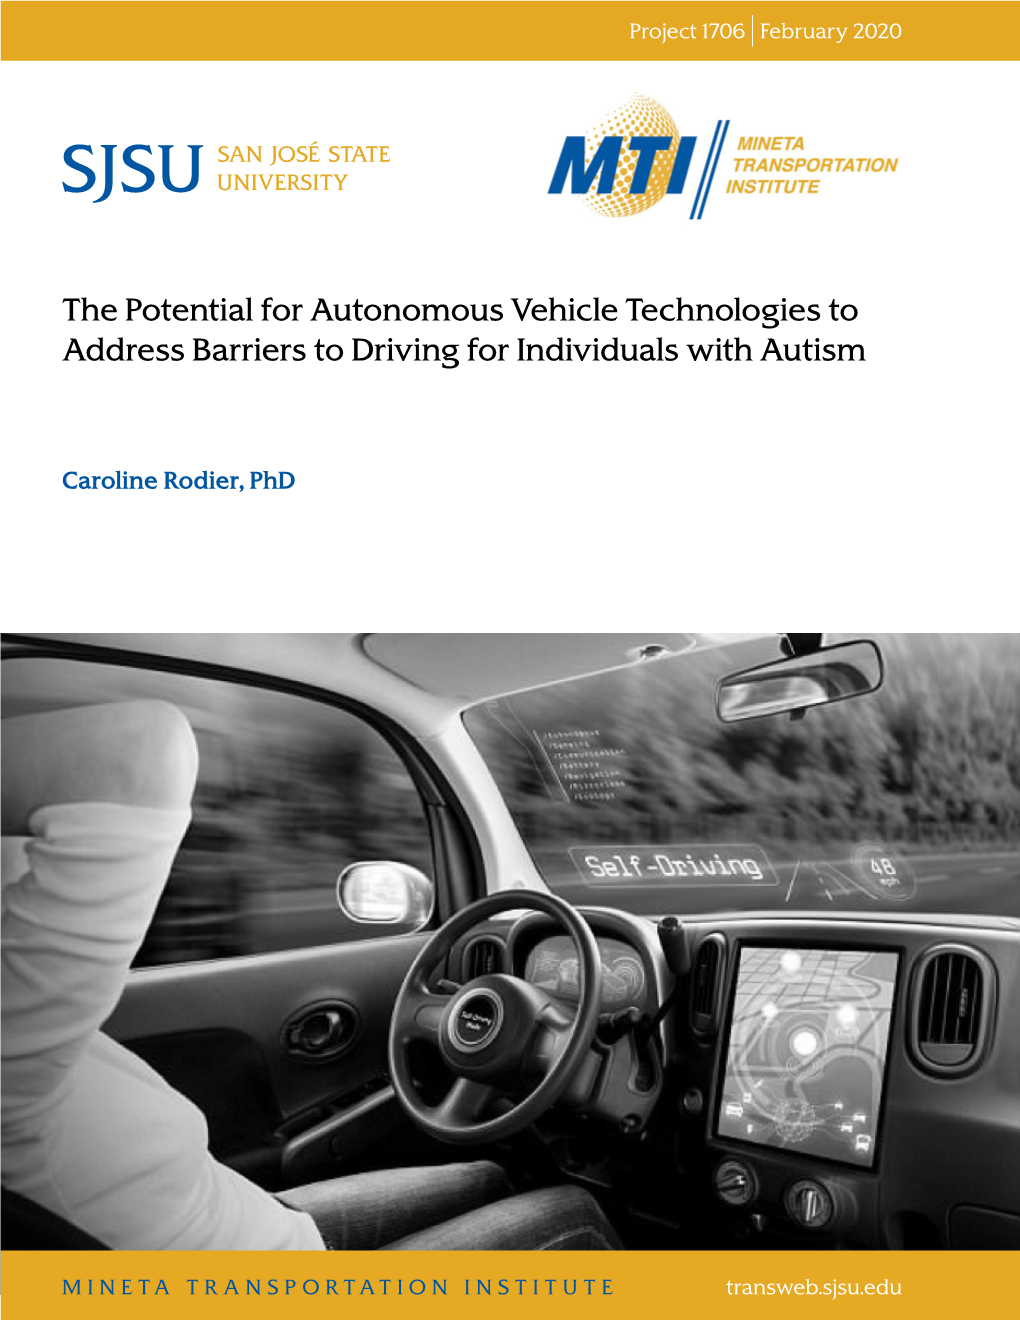 The Potential for Autonomous Vehicle Technologies to Address Barriers to Driving for Individuals with Autism